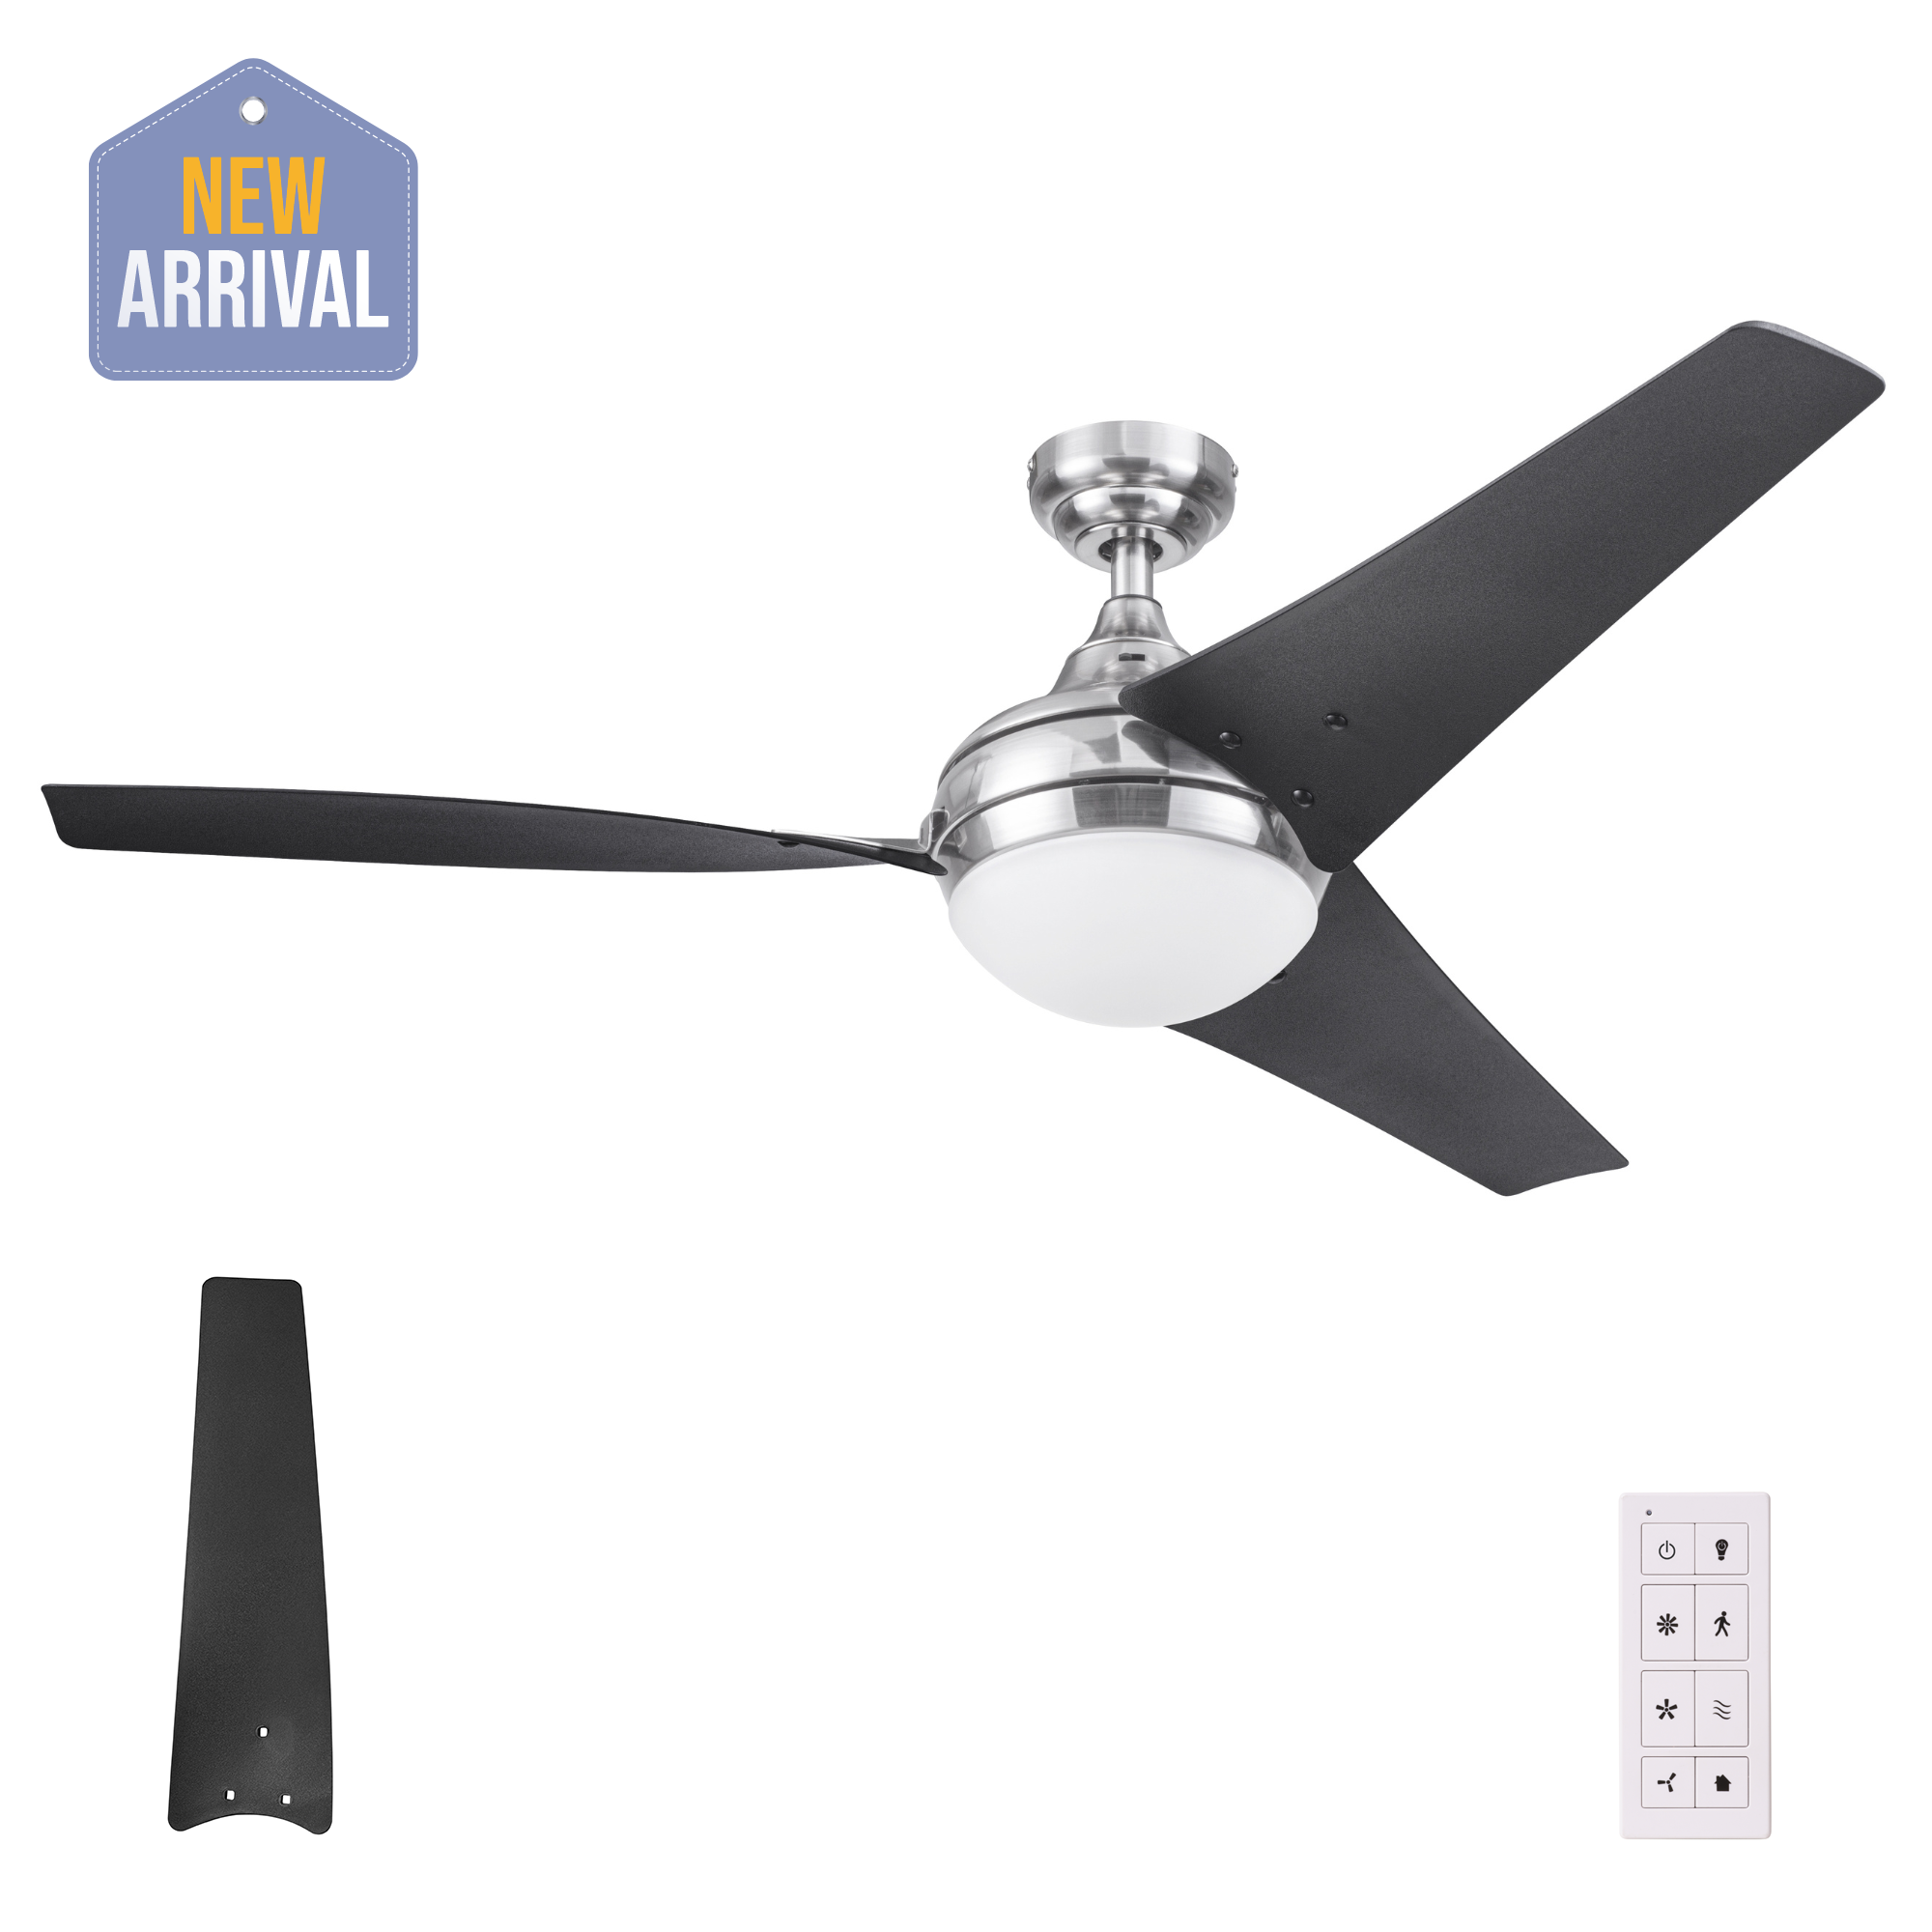 52 Inch Maxon, Satin Nickel, Remote Control, Ceiling Fan by Prominence Home